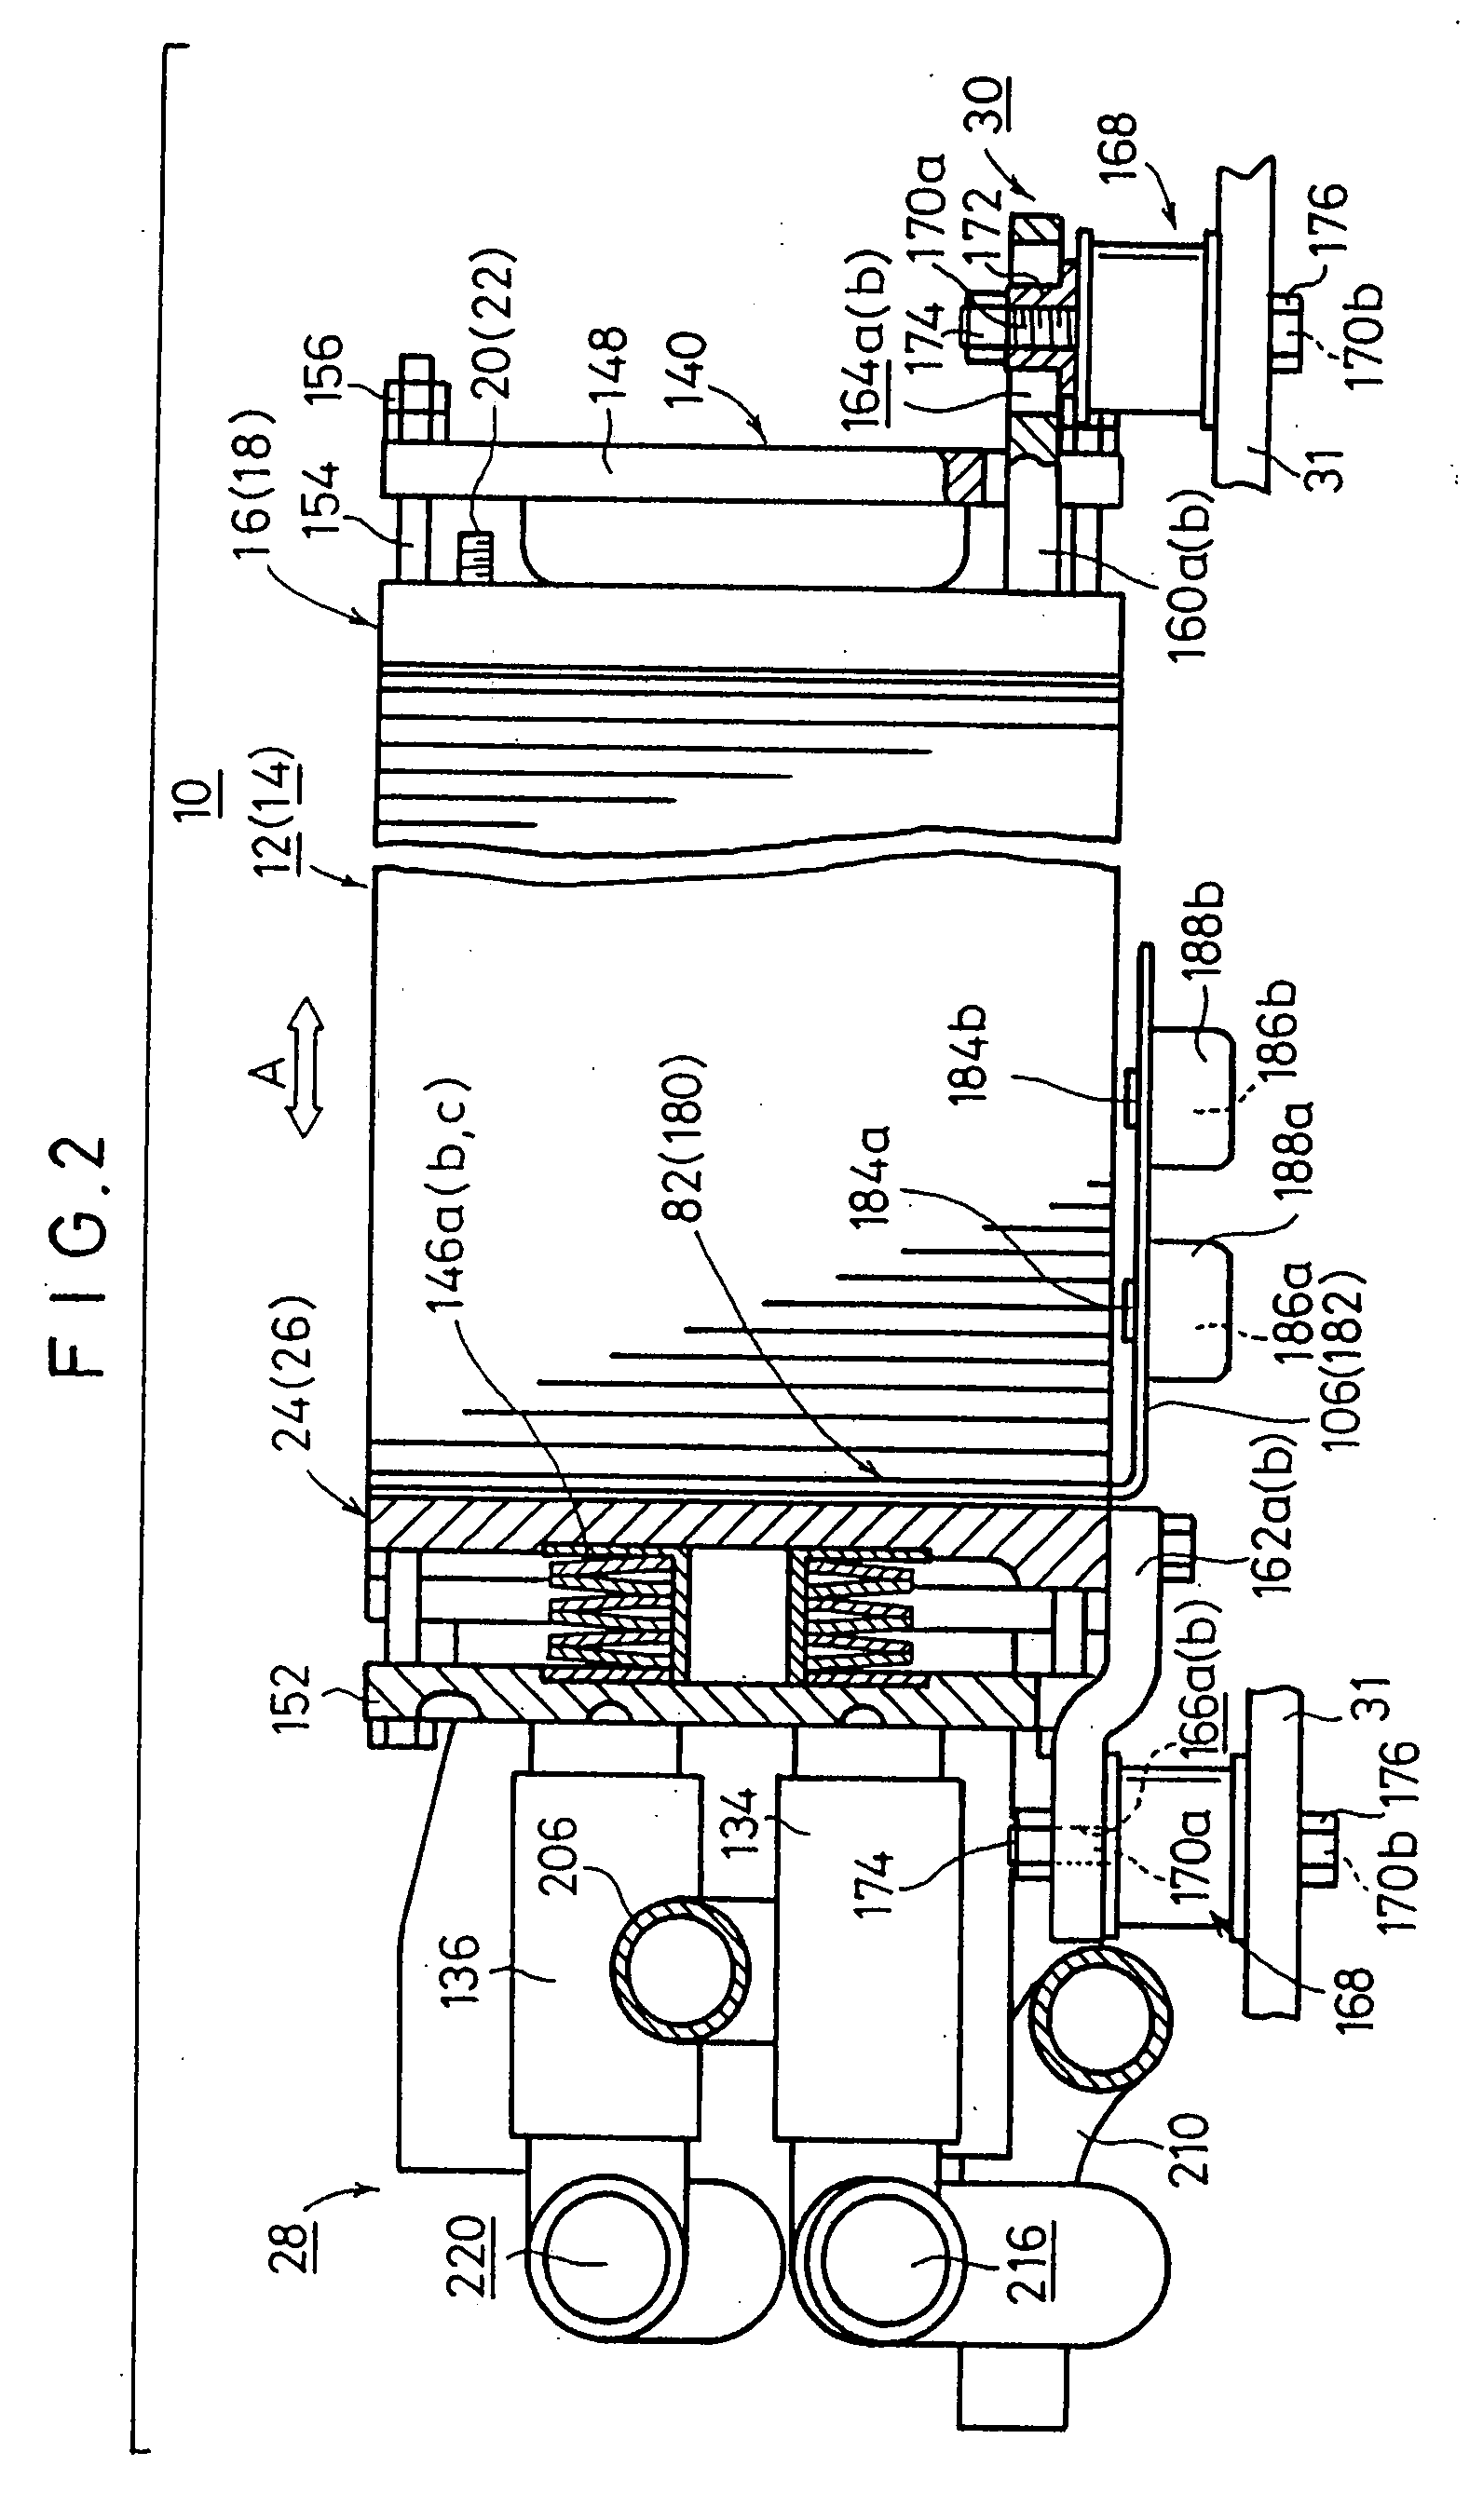 Solid polymer electrolyte fuel cell stack